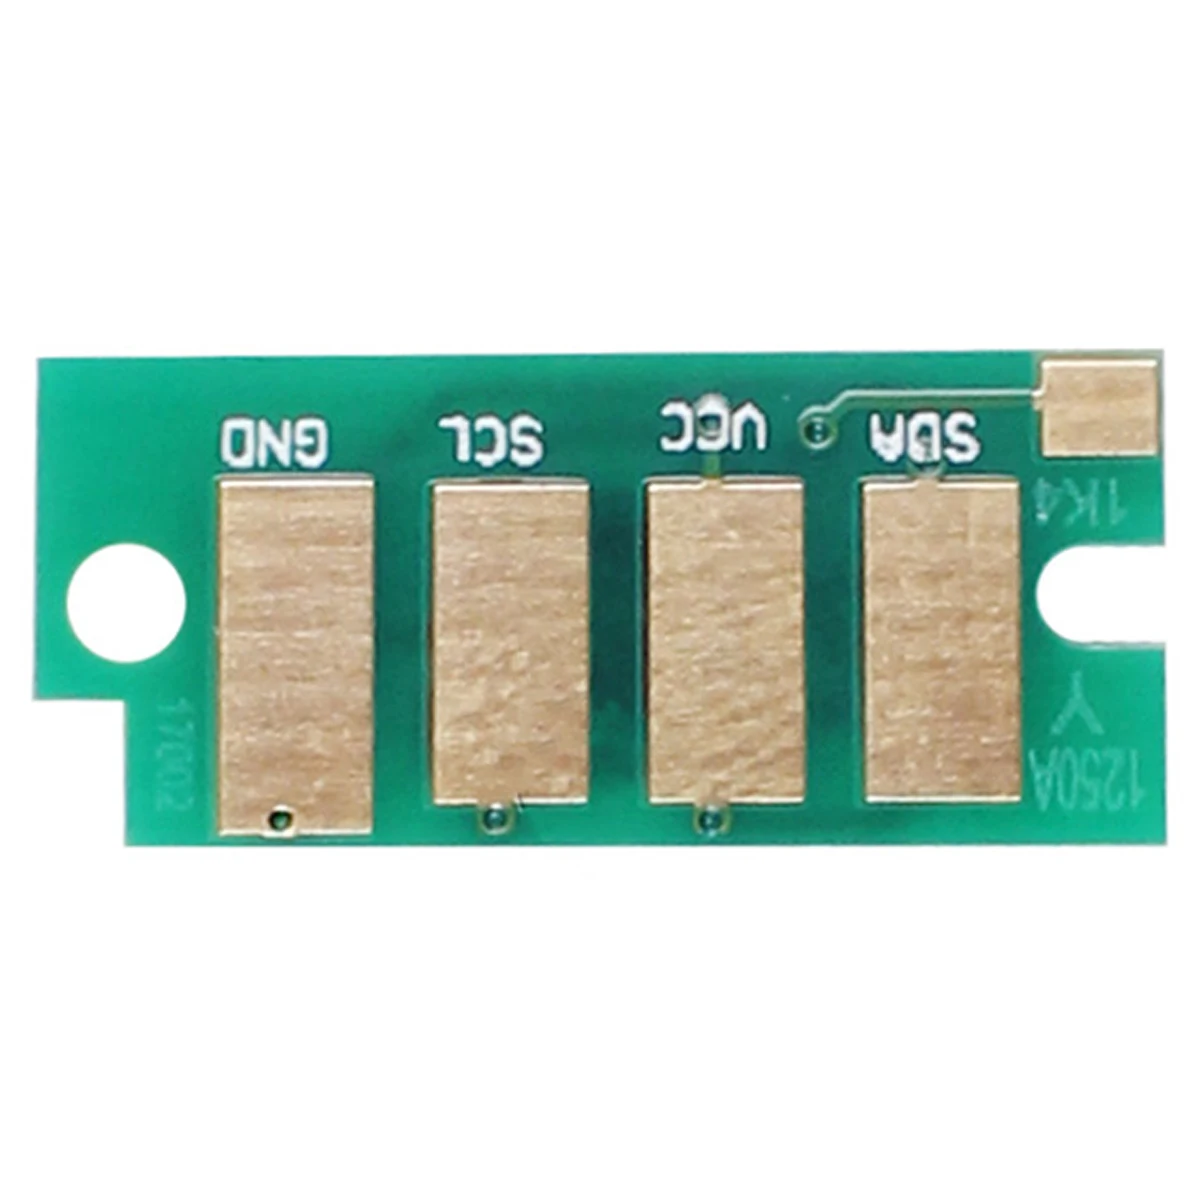 

Toner Chip for Fuji Xerox Phaser 6510 DN N 6510 DNI WorkCentre WC 6515DN 6515 DNI 6515 DNW 6515 N 6515 NW 106R03694 106R03695